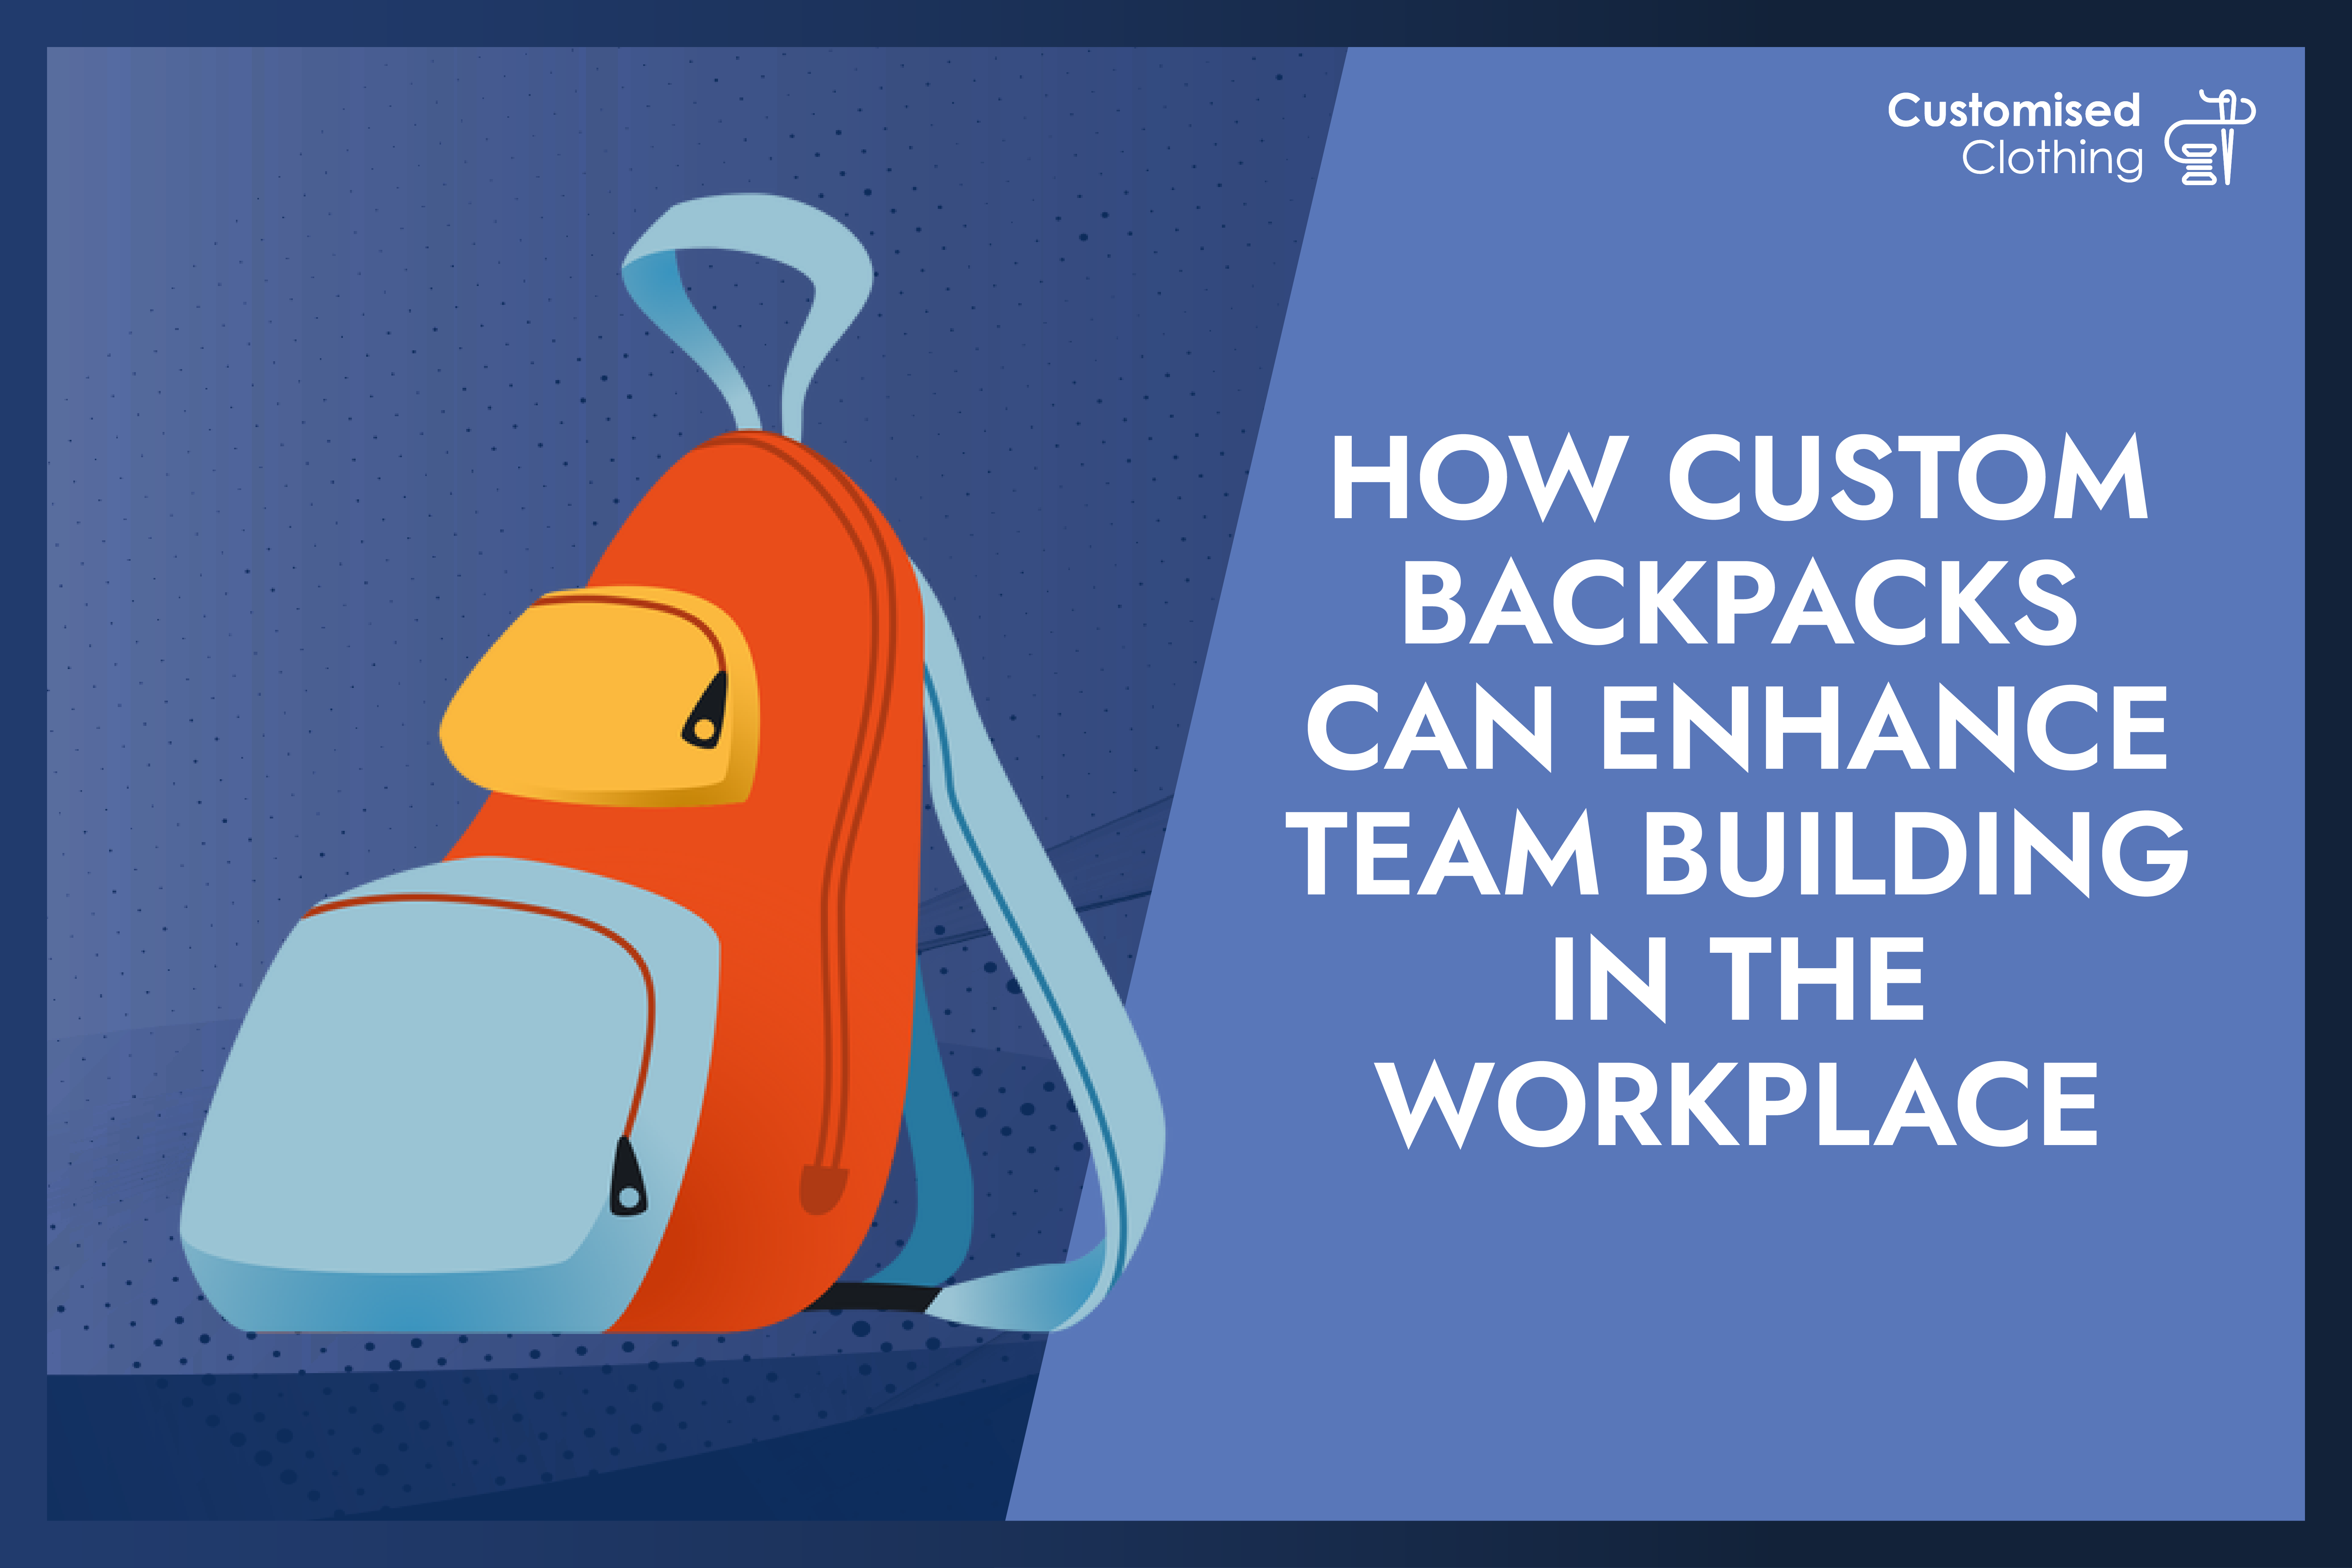 How Custom Backpack Can Enhance Team Building In The Workplace?